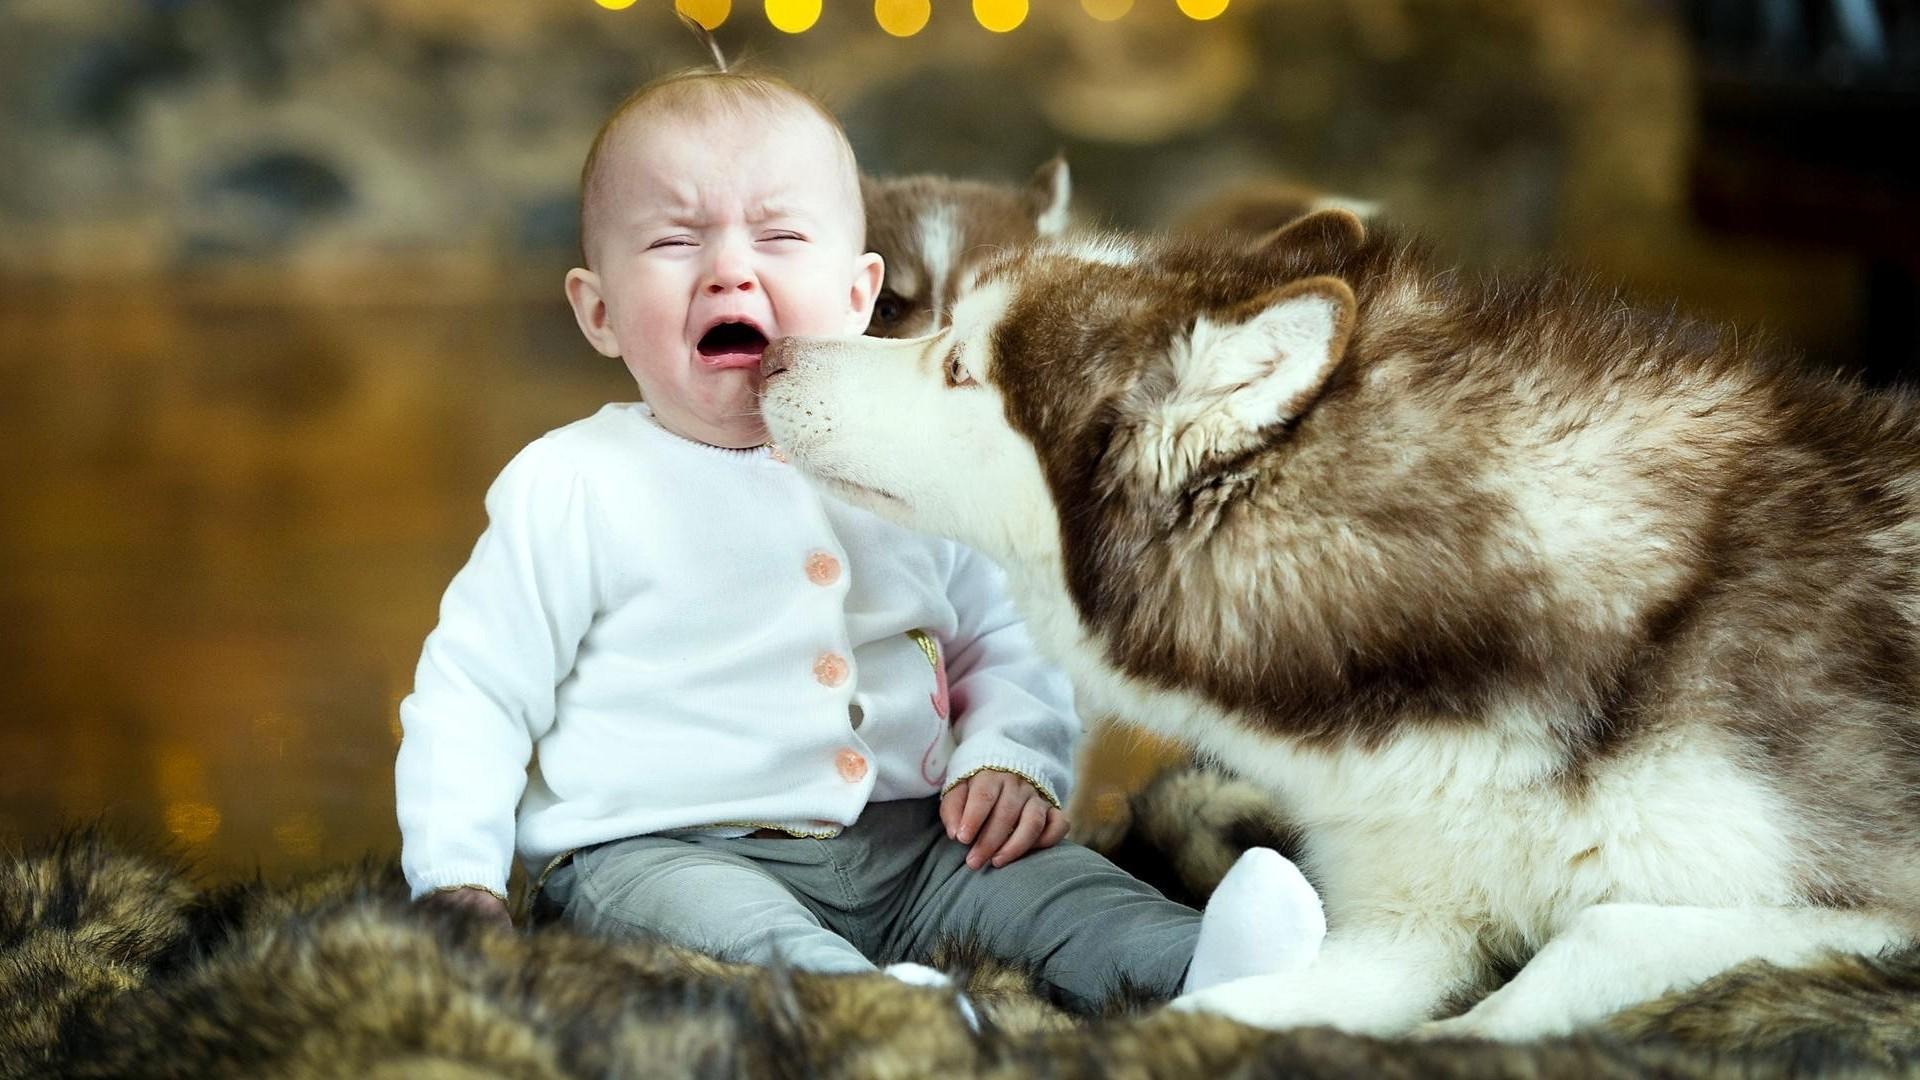 Cute Crying Baby With Dog Wallpaper